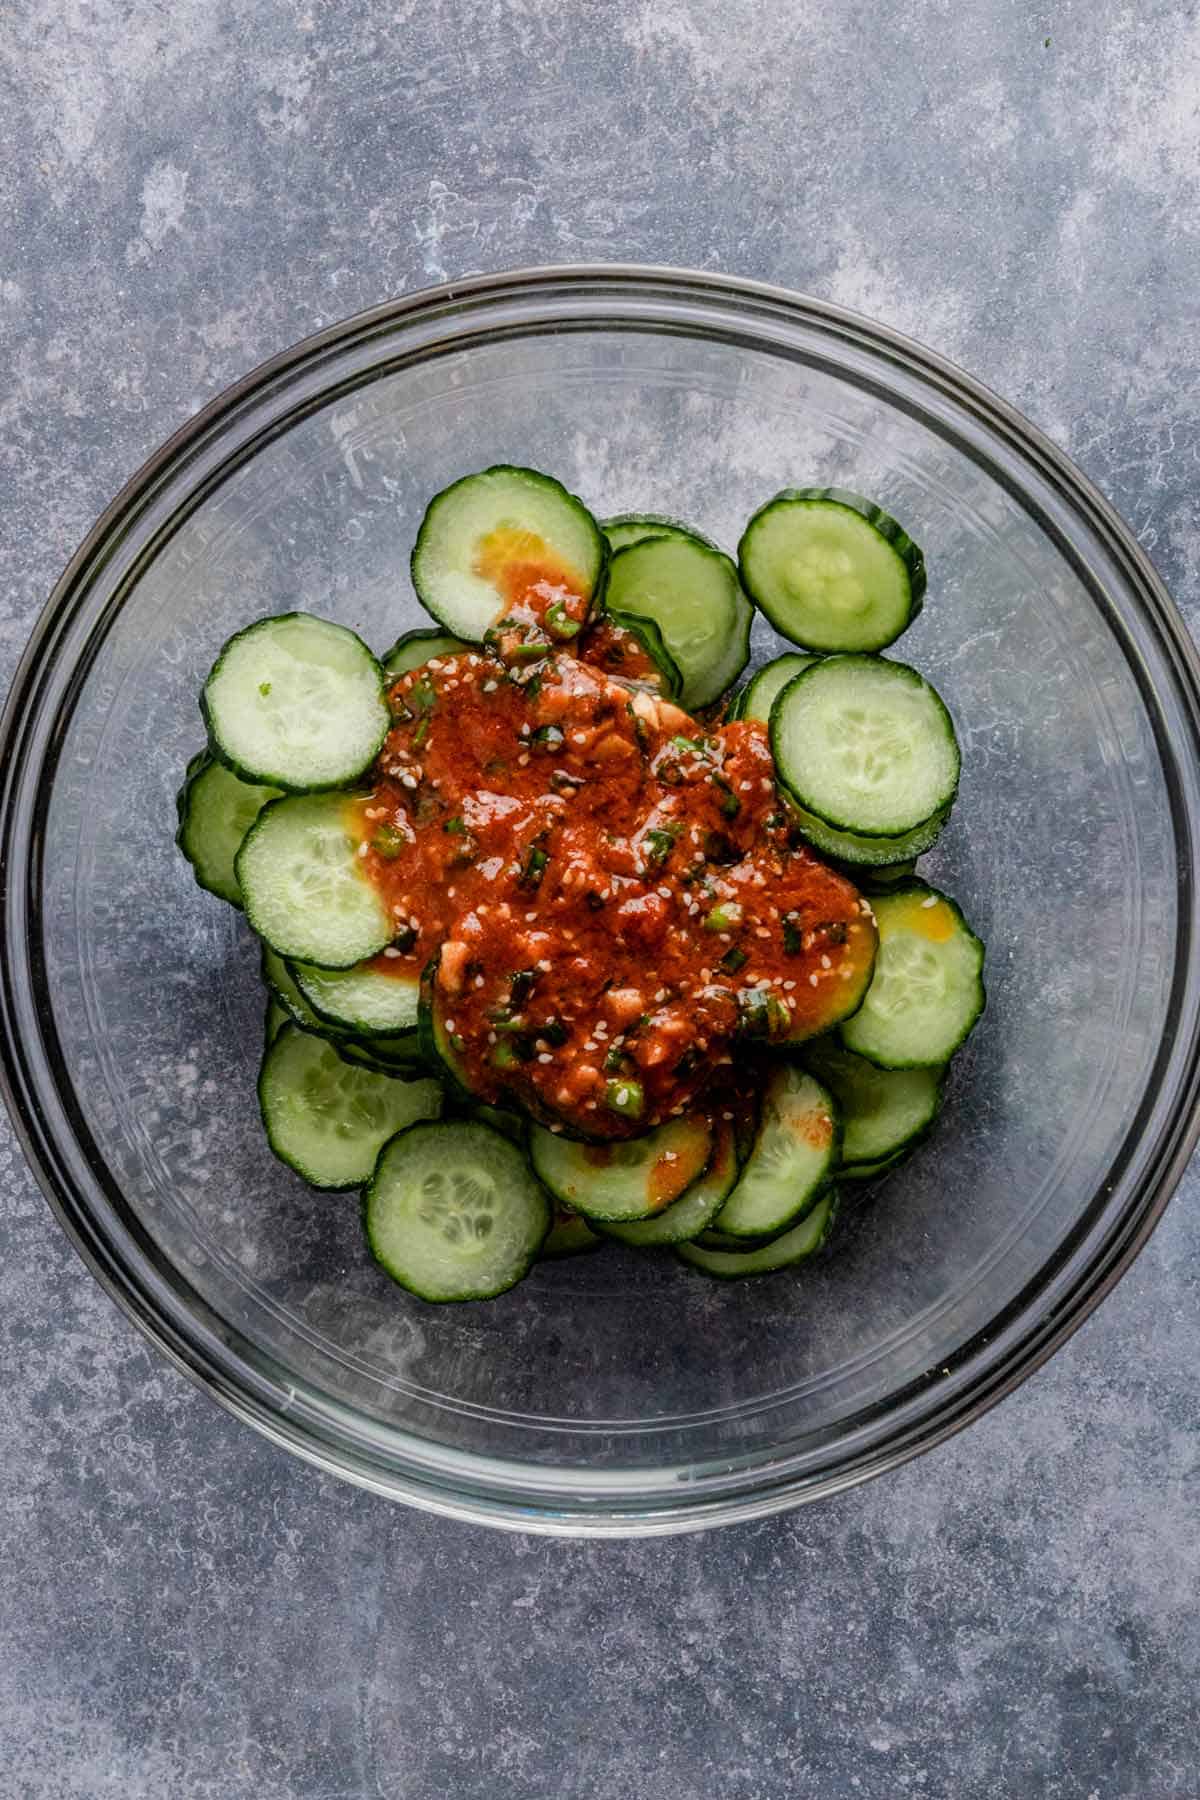 slices of cucumber in a bowl with red dressing on top